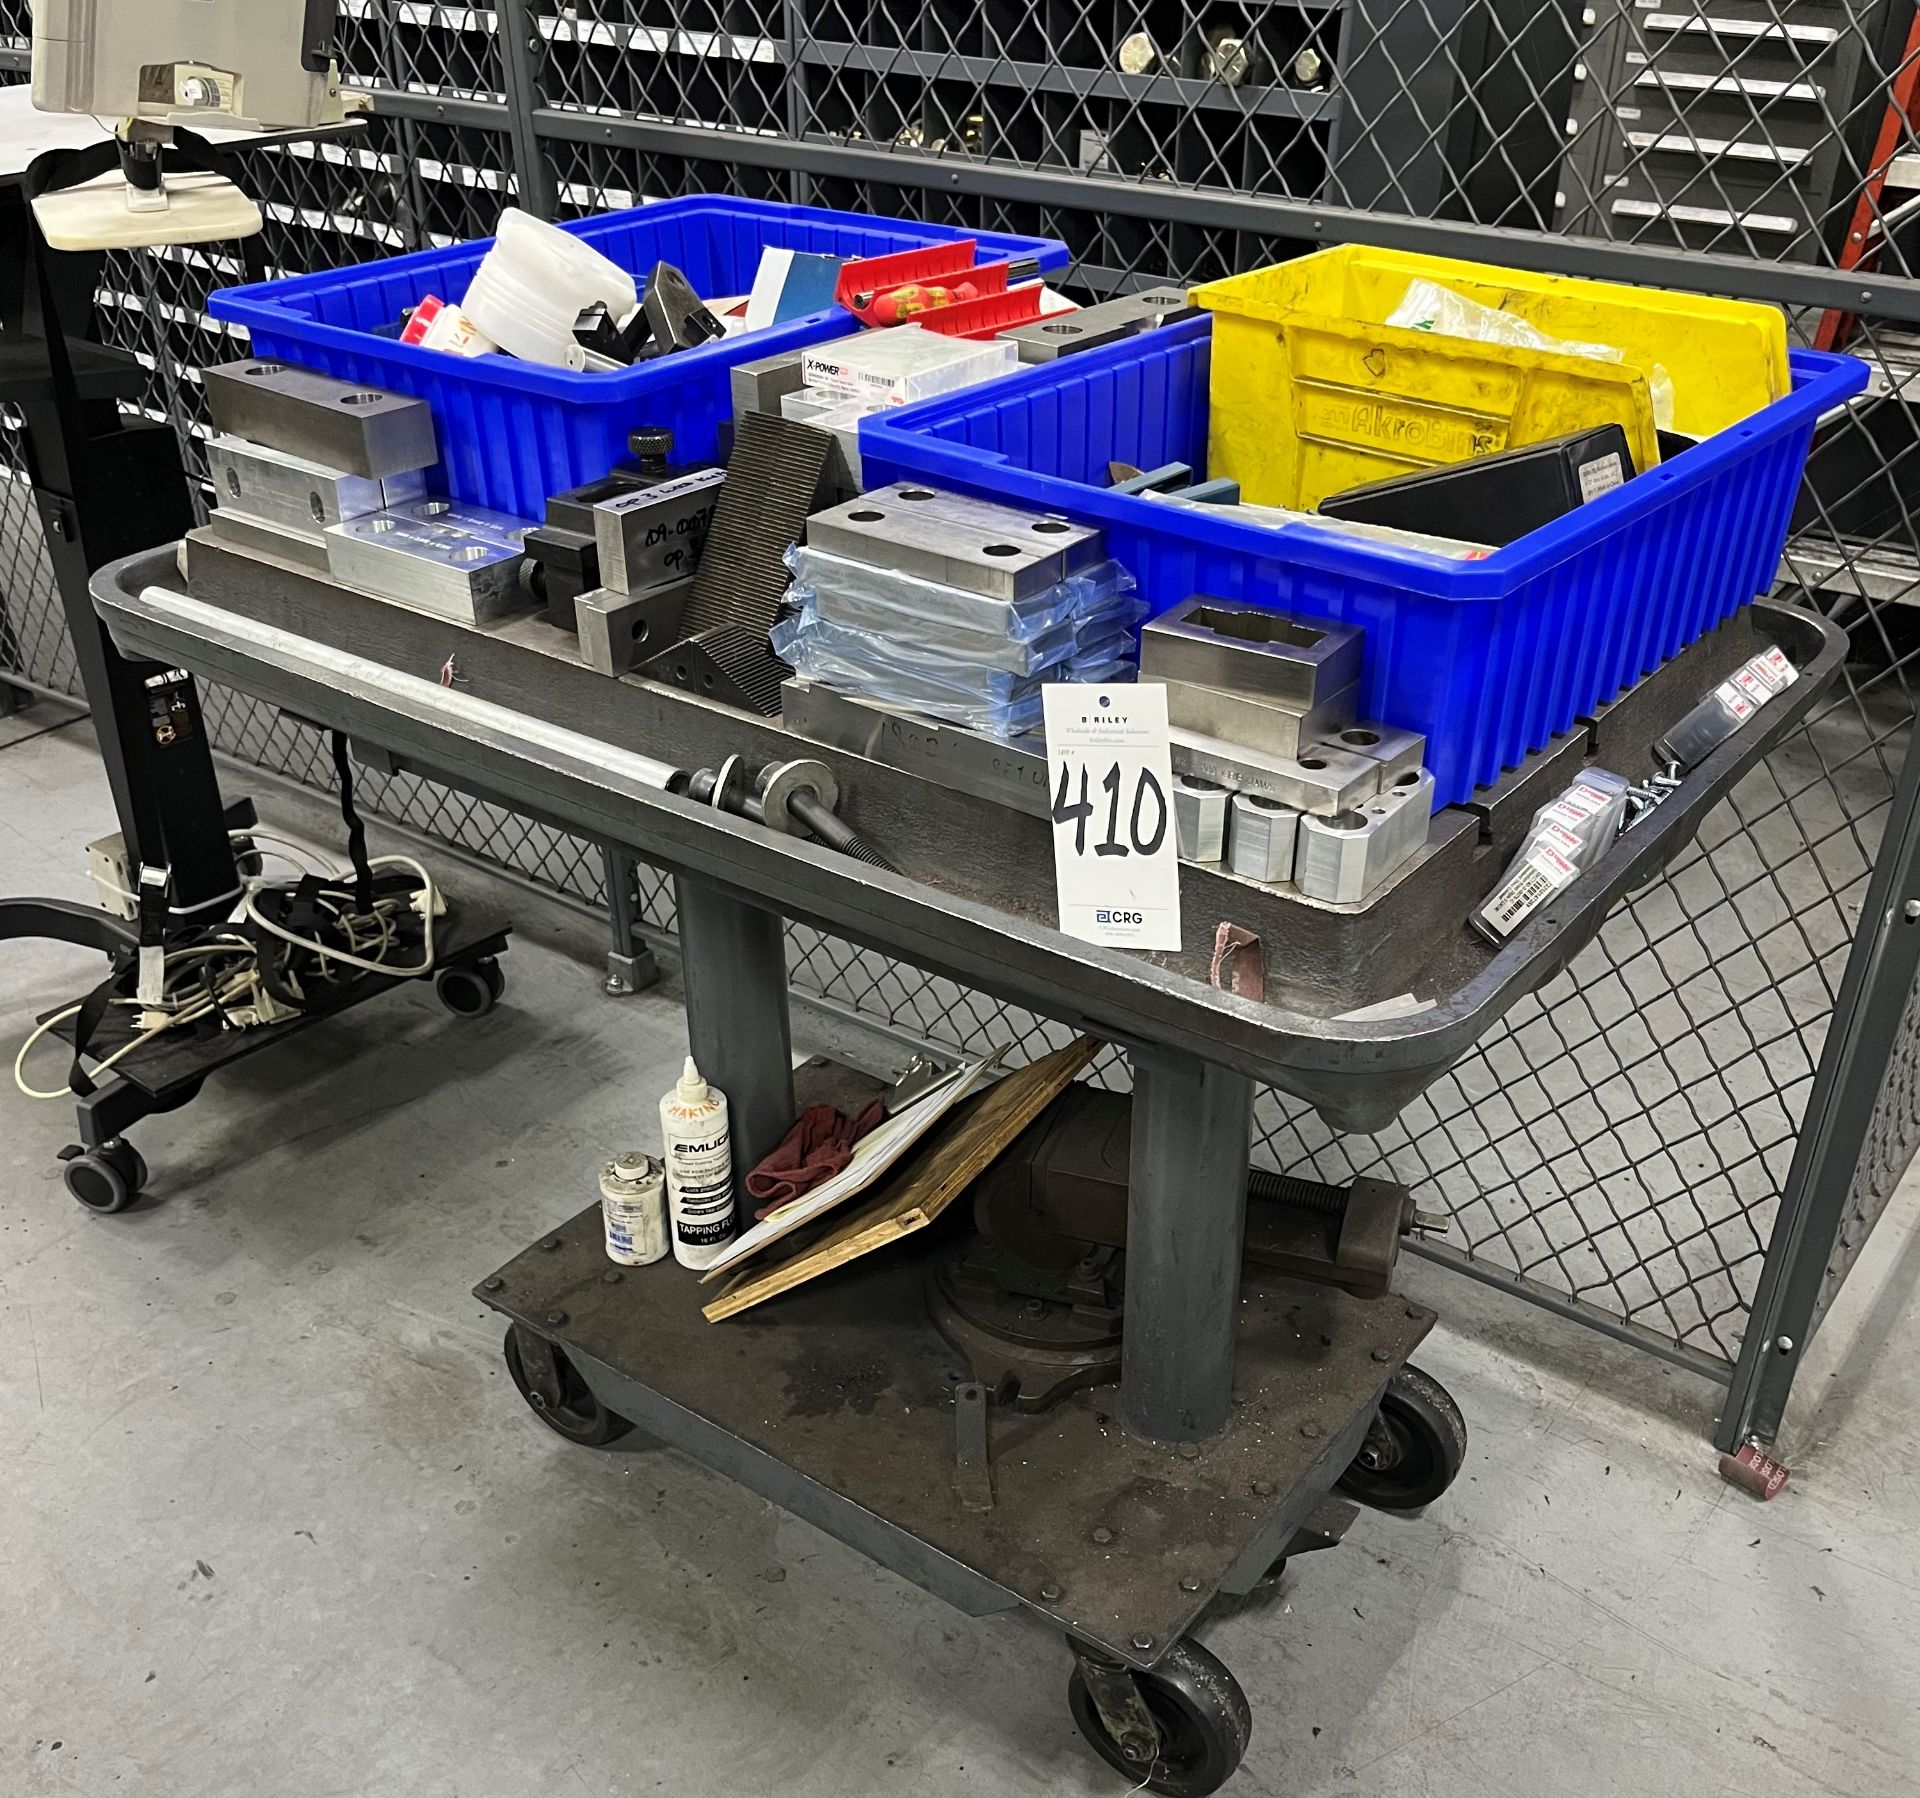 Elevating 4 wheel cart with miscellaneous hardware and tooling